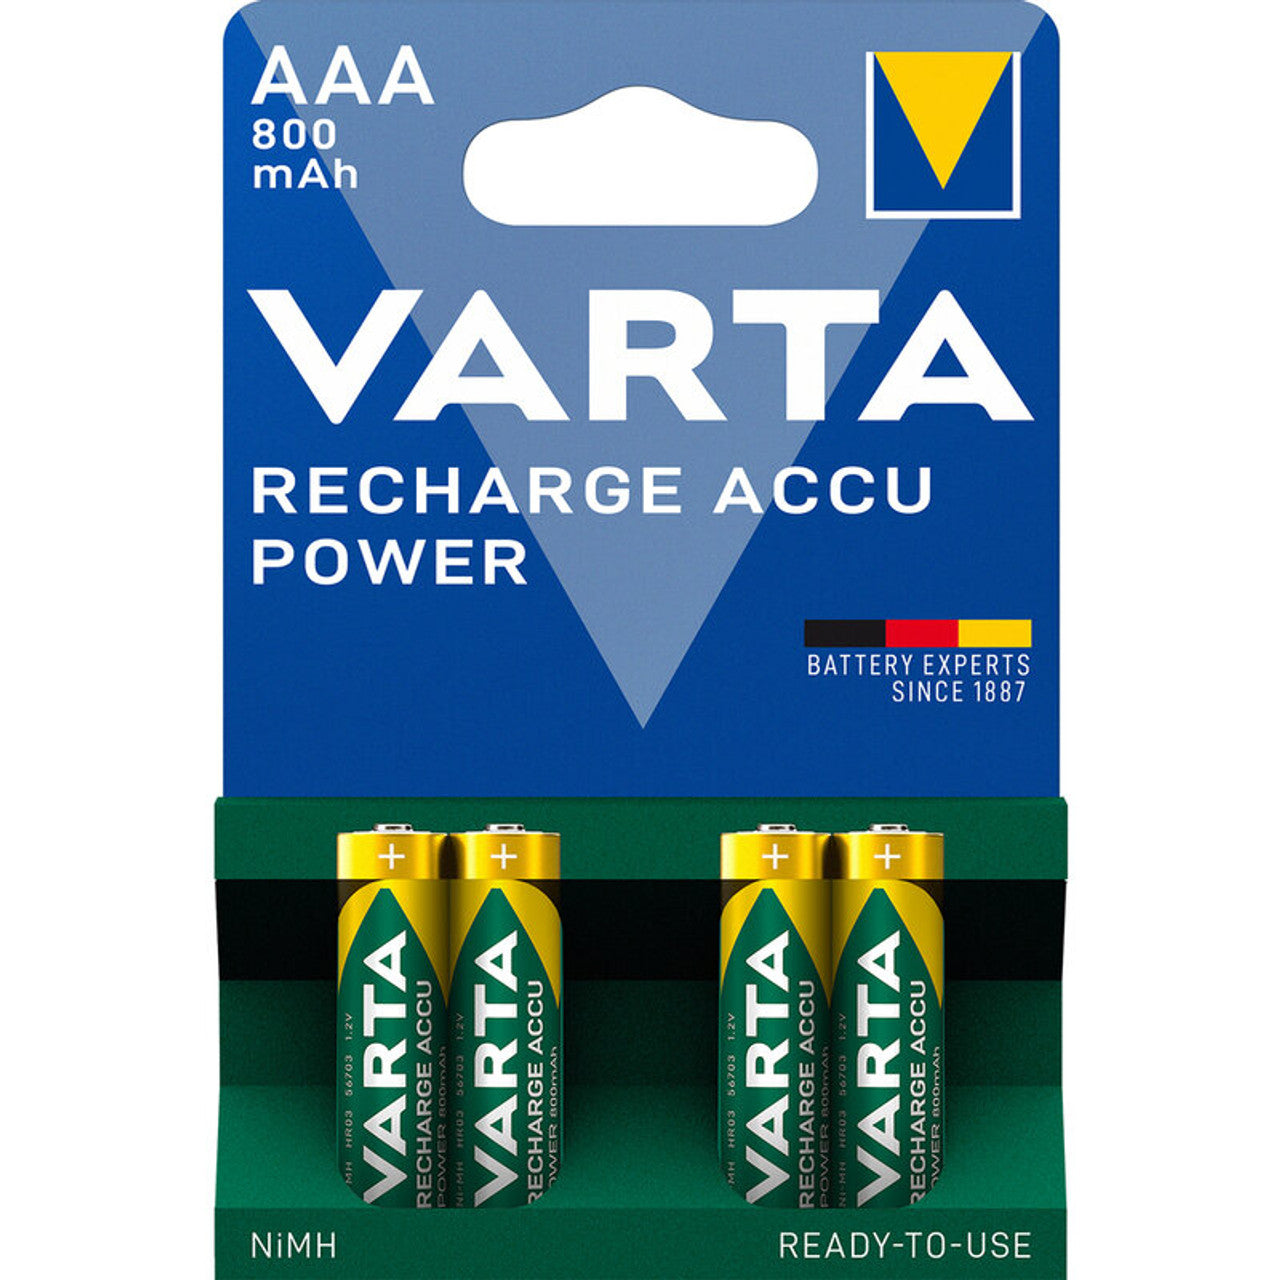 Varta Rechargeable Recycled batteries (4 batteries - AAA 800 mAh)